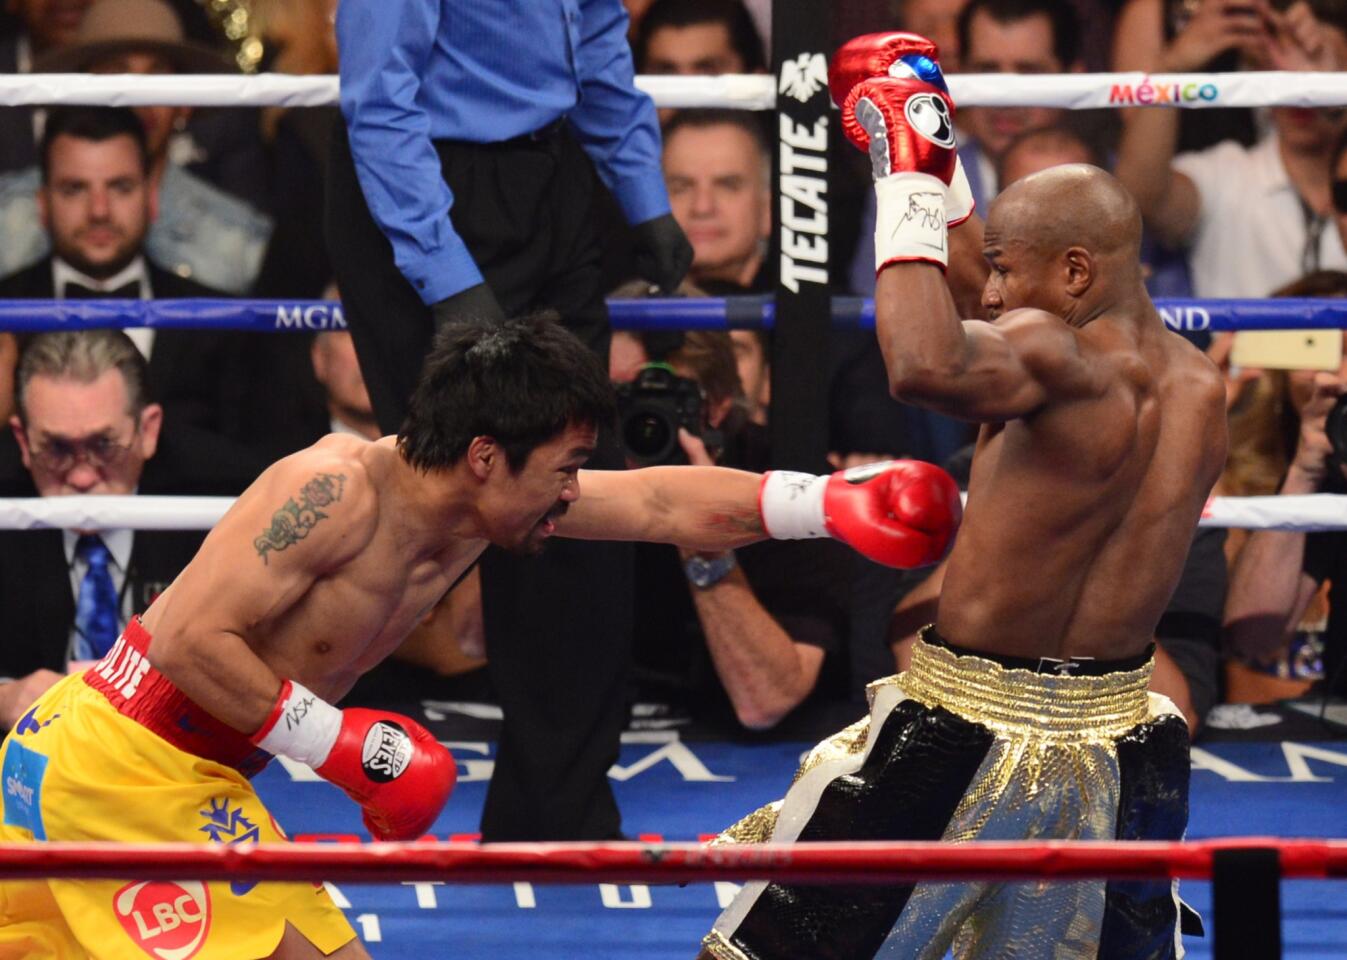 Manny Pacquiao throws a punch in the first round.